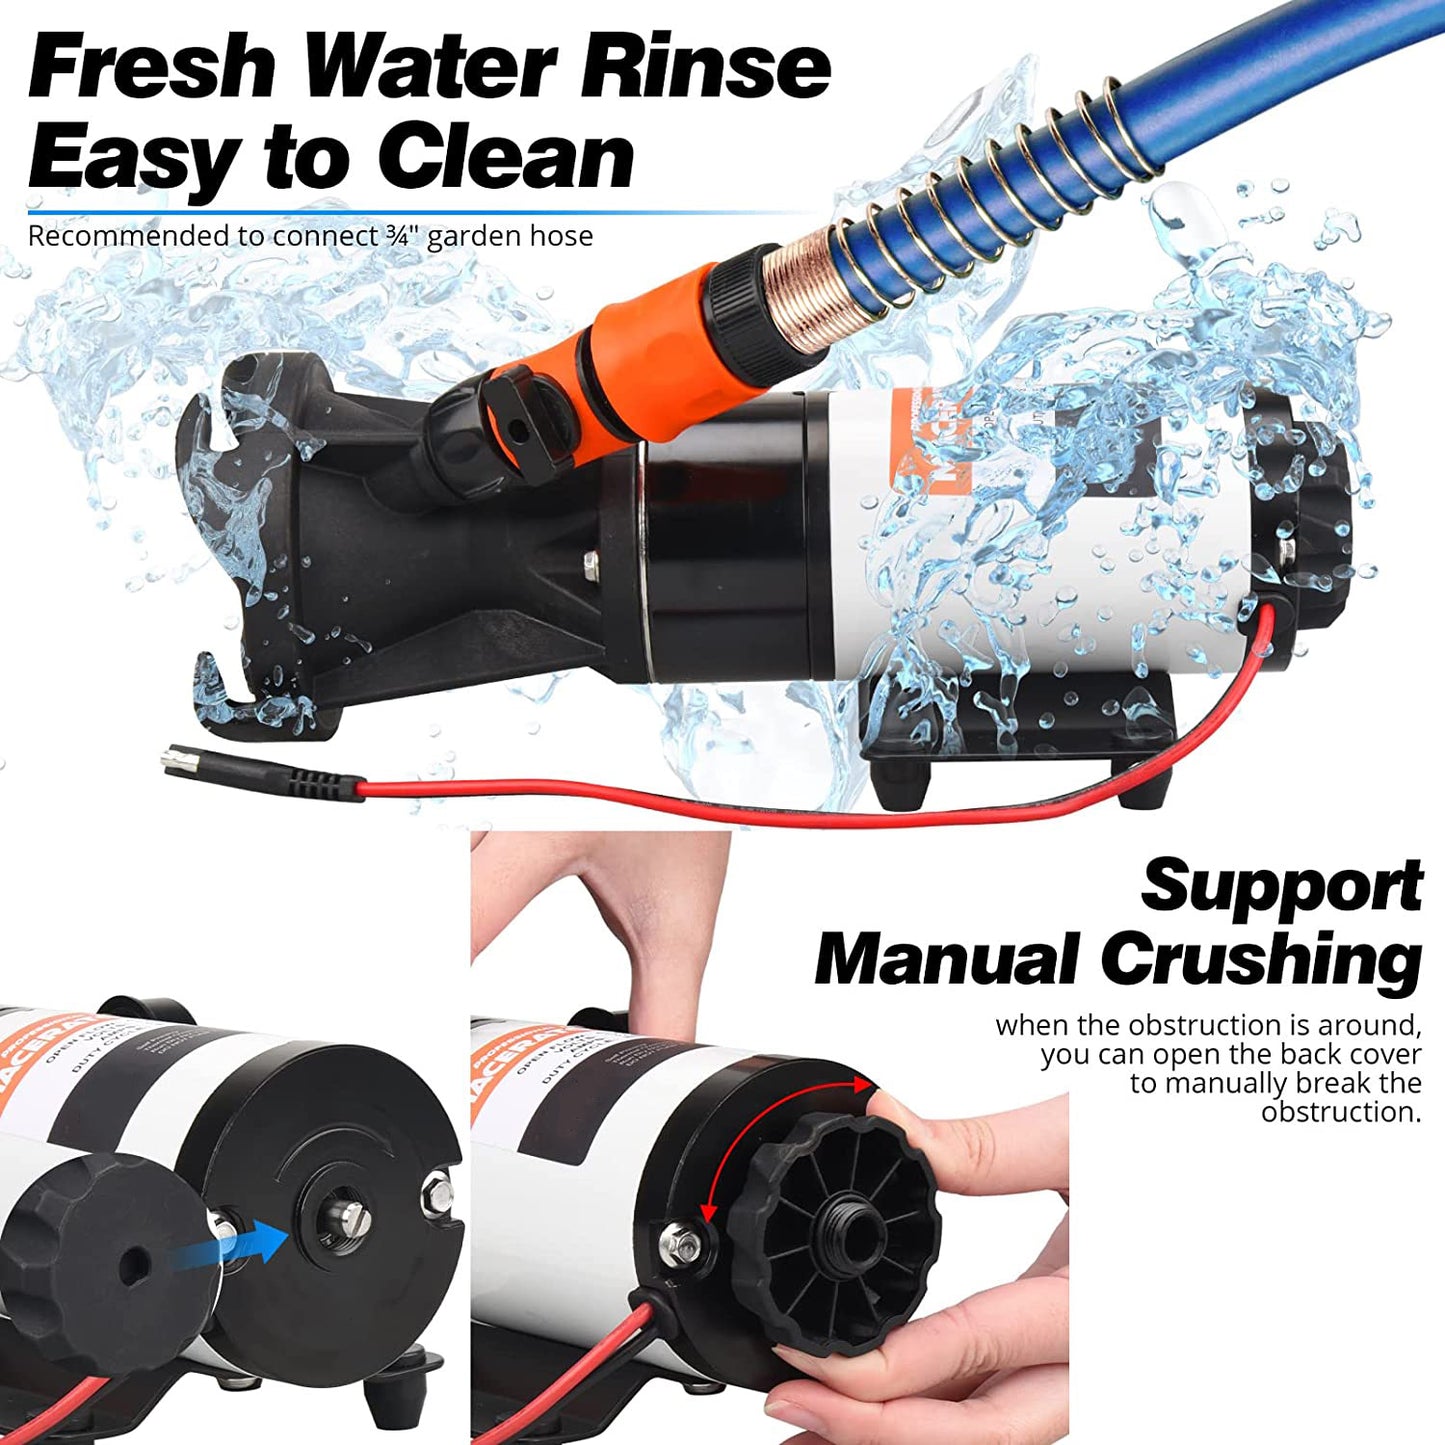 RV Macerator Pump 12V 12GPM Self-Priming Sewer Pump|Quick Release Sewage Chopper Pump|Waste Water Pump with Hoses & Clamps